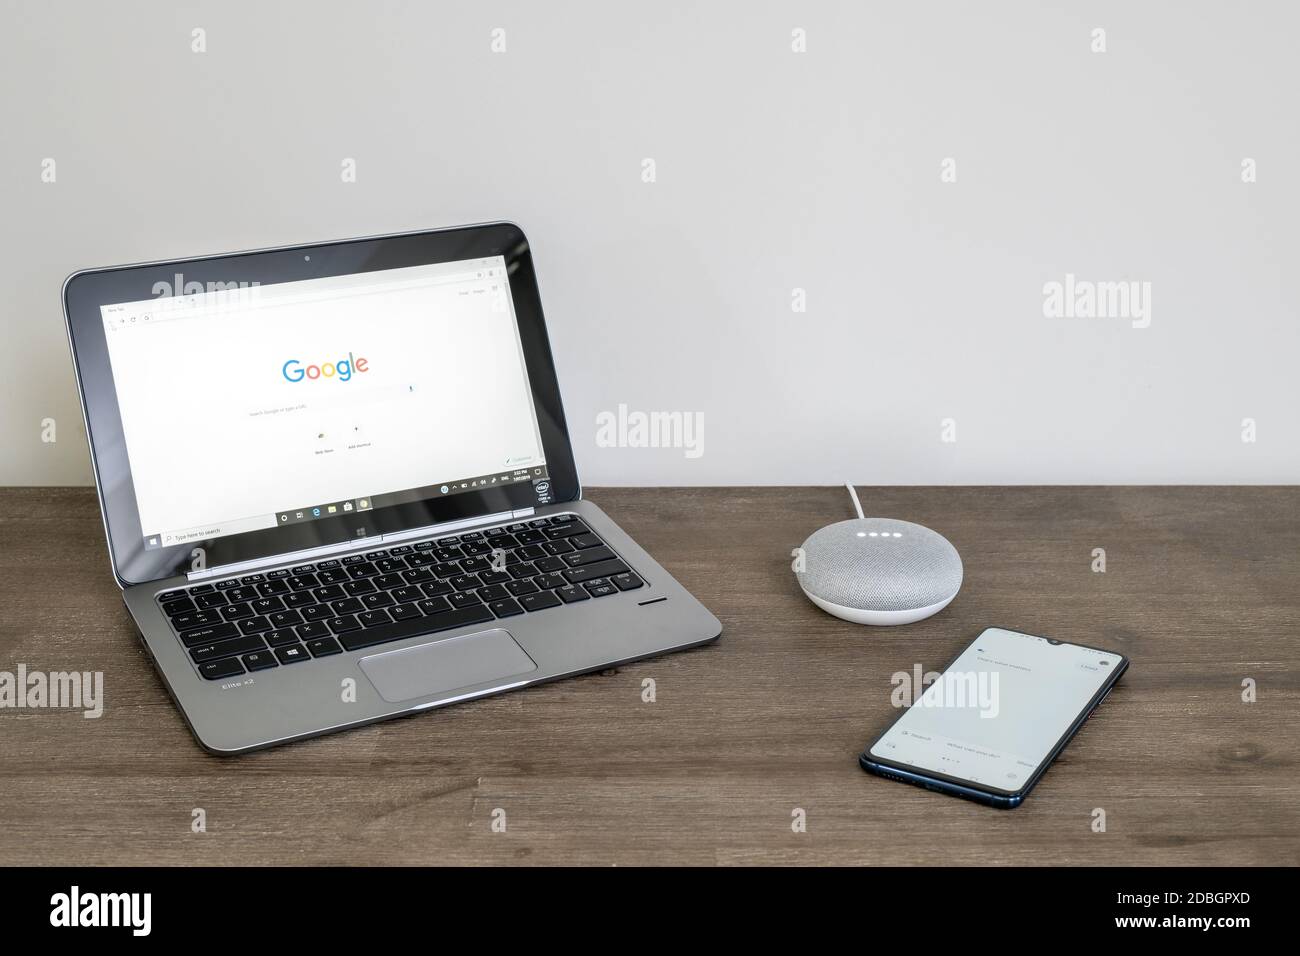 Adelaide, Australia - July 7, 2019: Google Home Mini with HP laptop running Windows  10 and mobile phone set up on the table next to each other Stock Photo -  Alamy